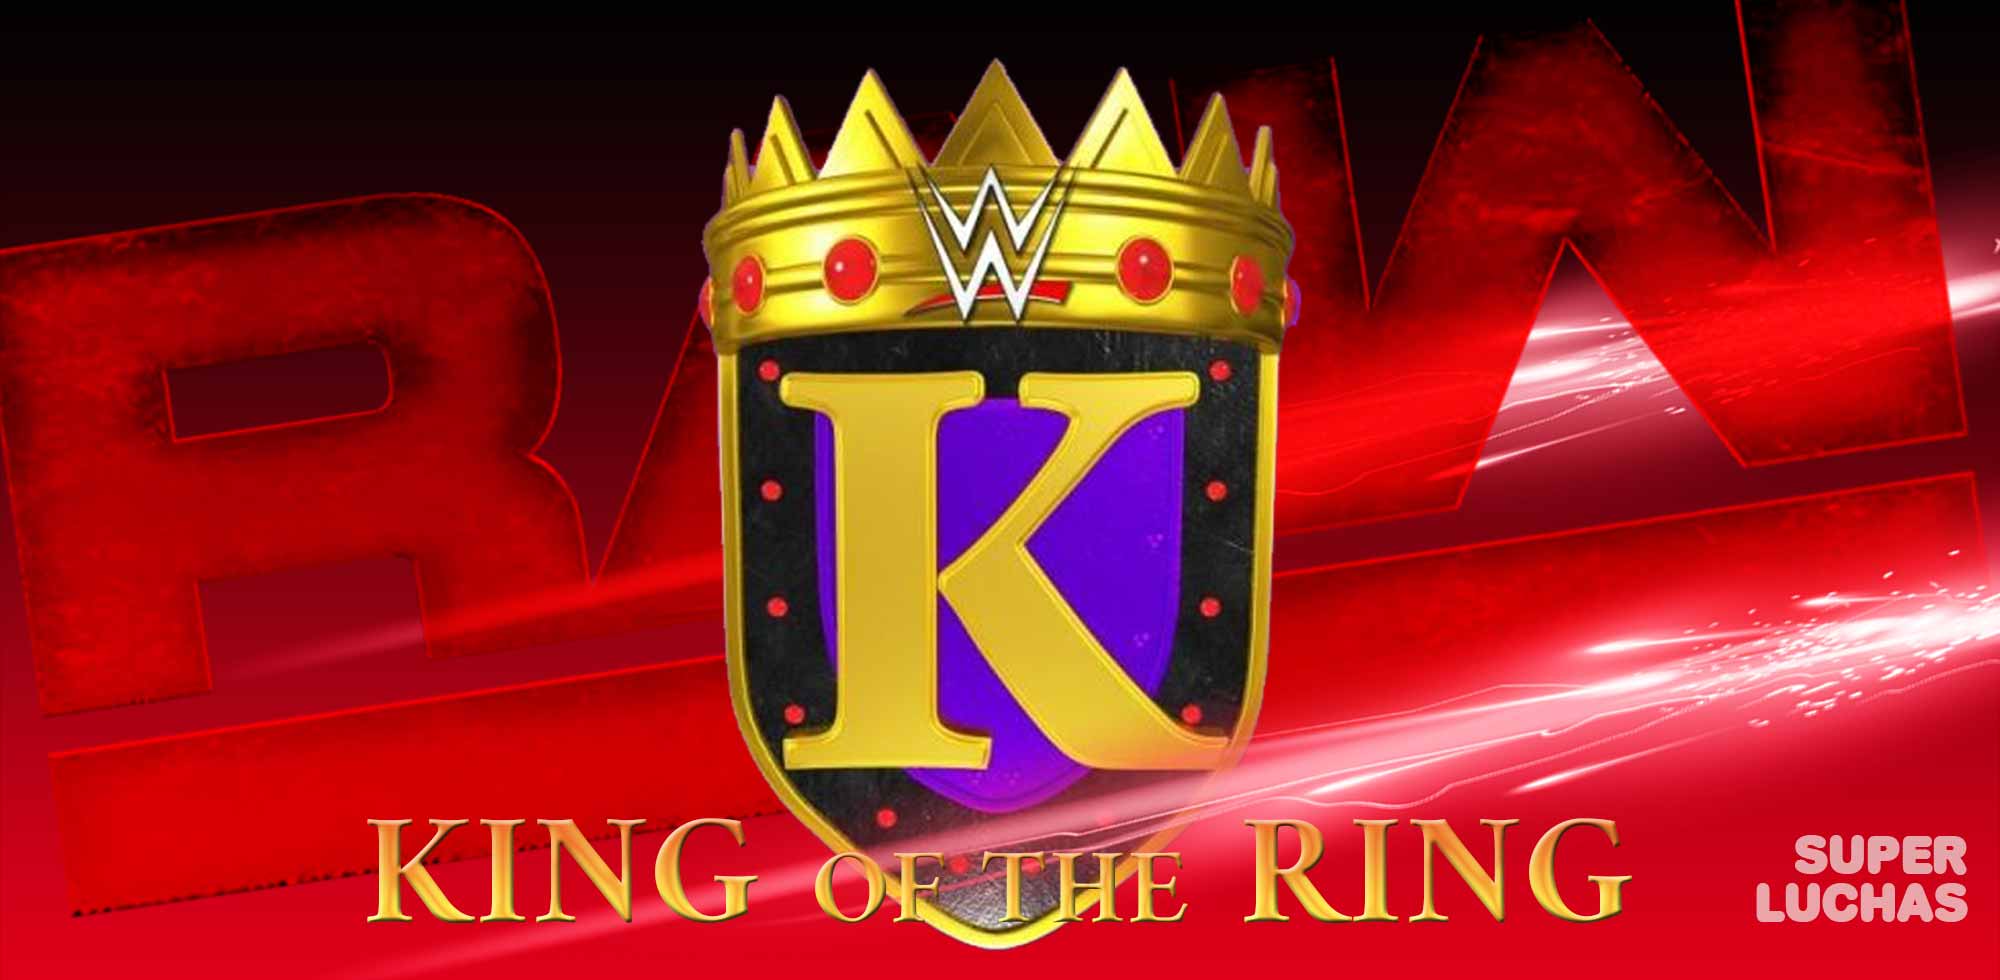 WWE King of the Ring 2019